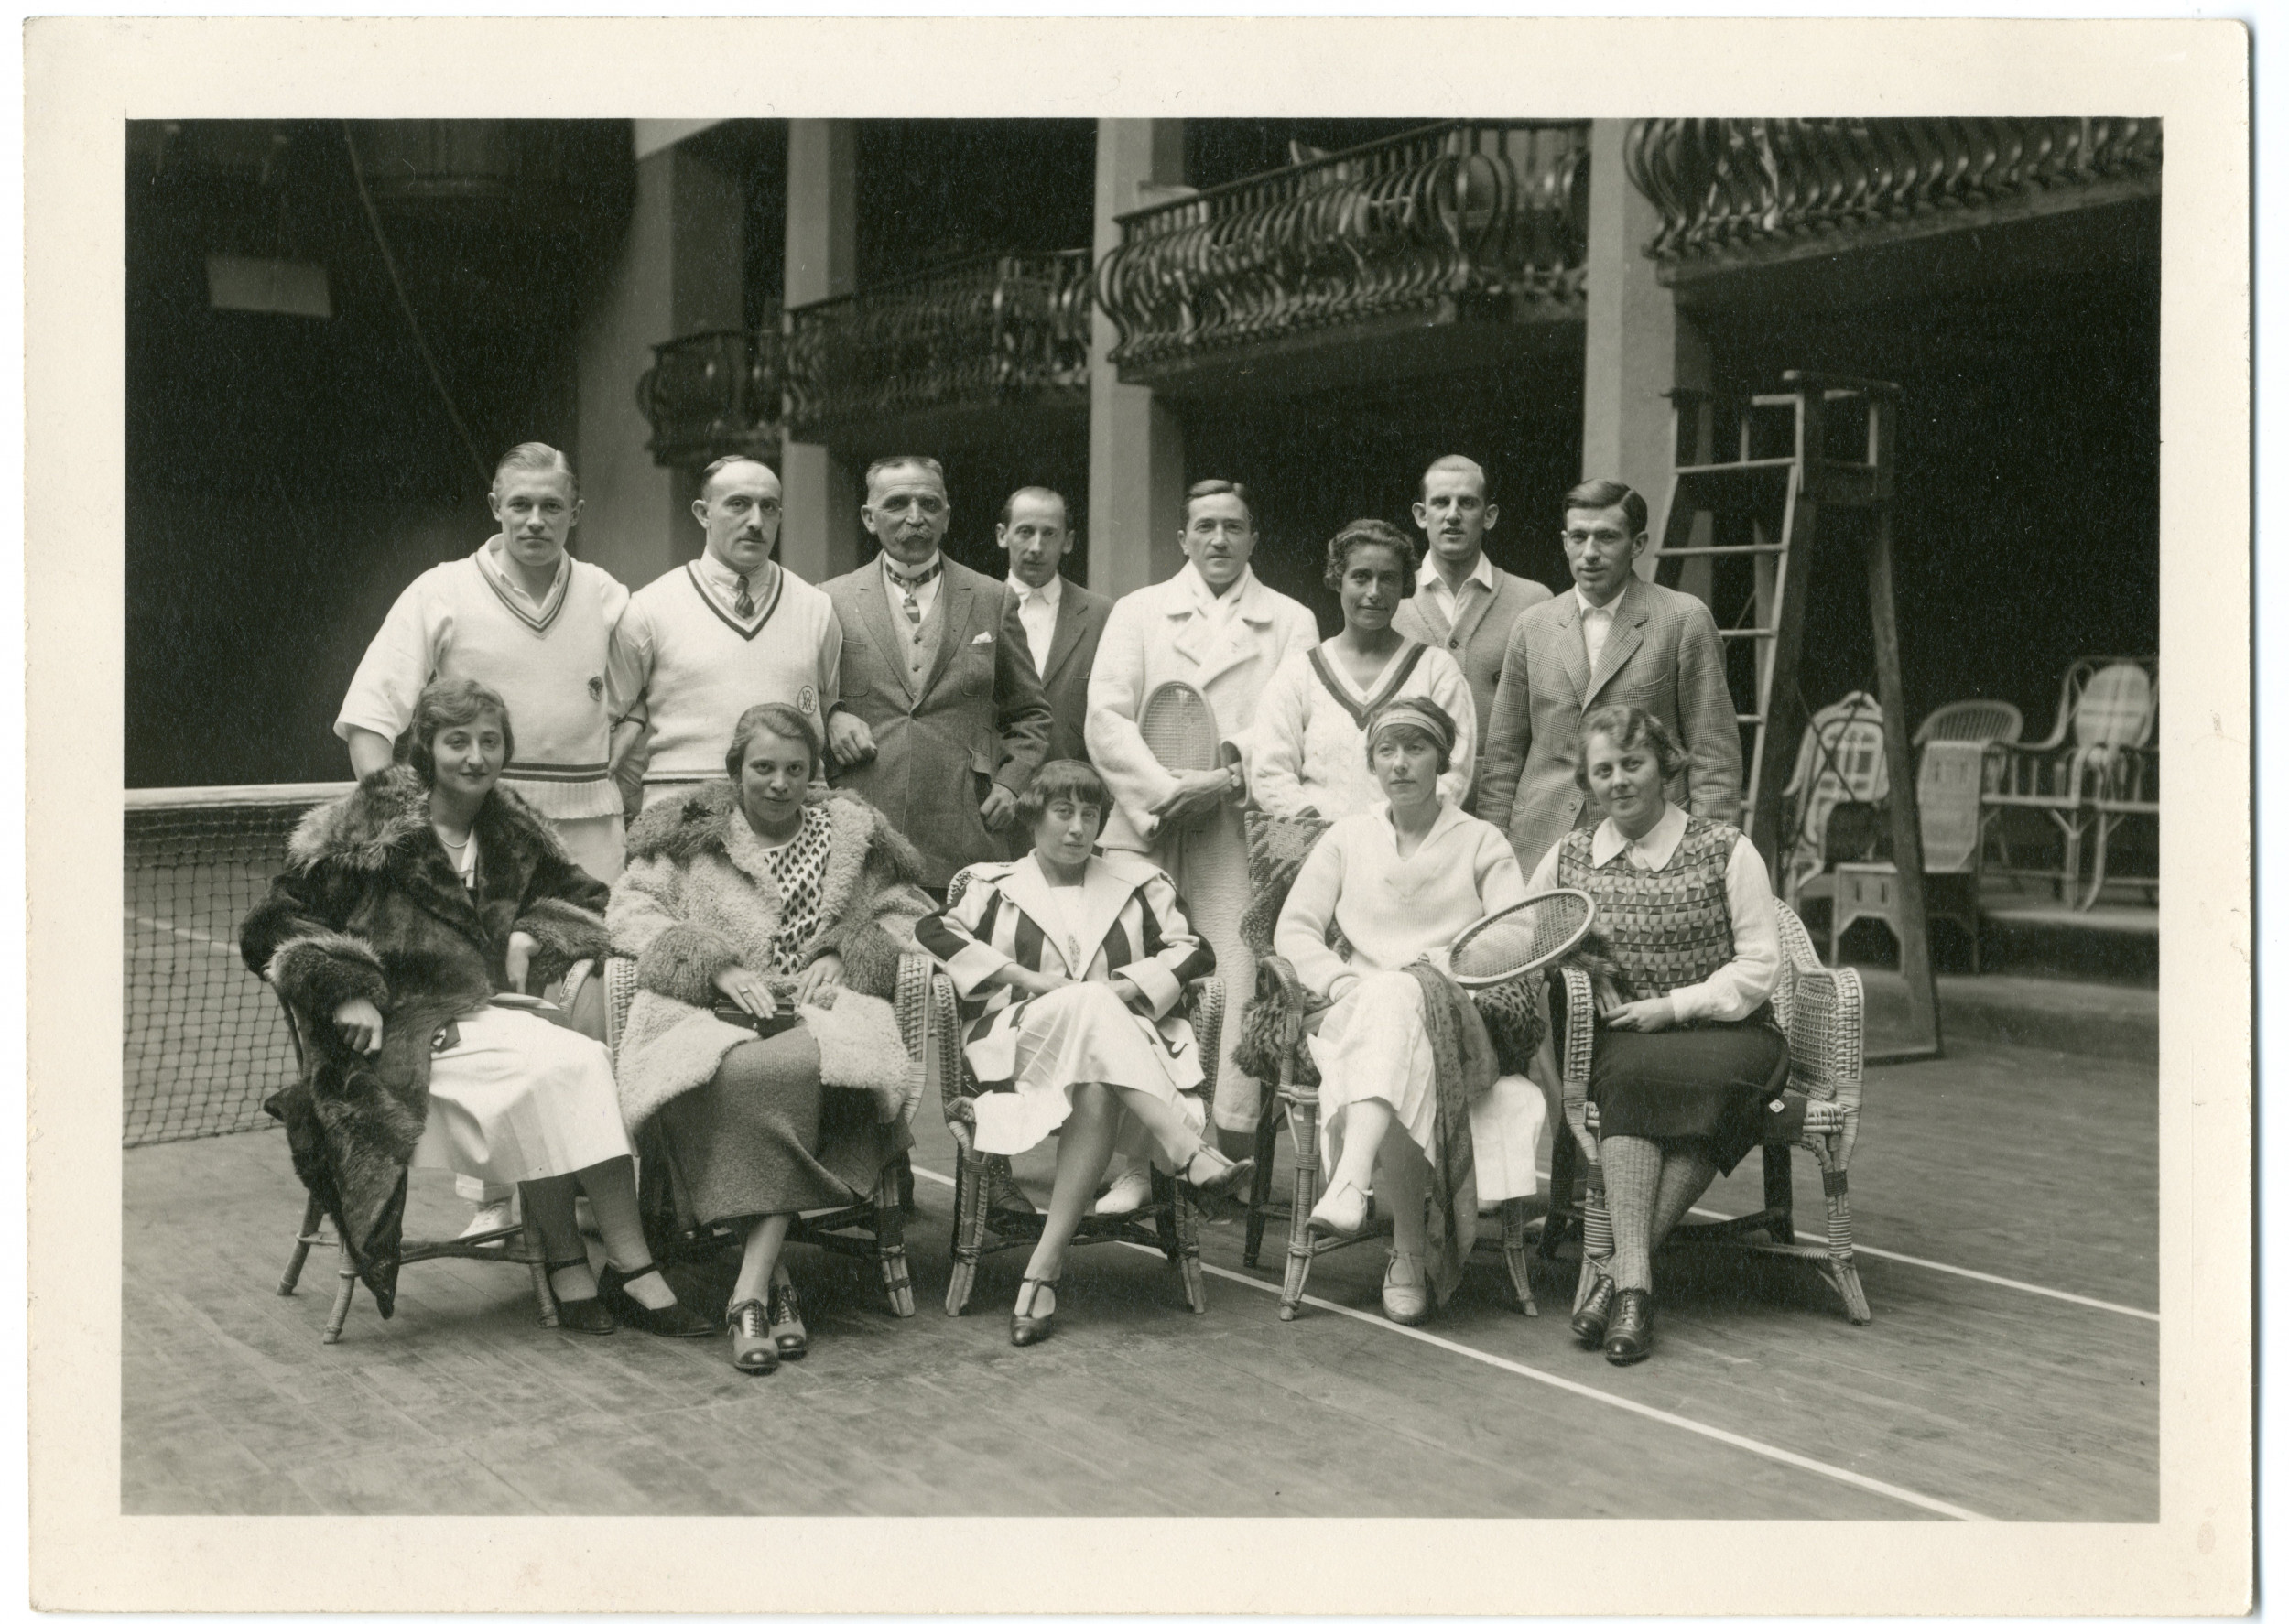 Historic tennis picture at Badrutt's Palace Hotel